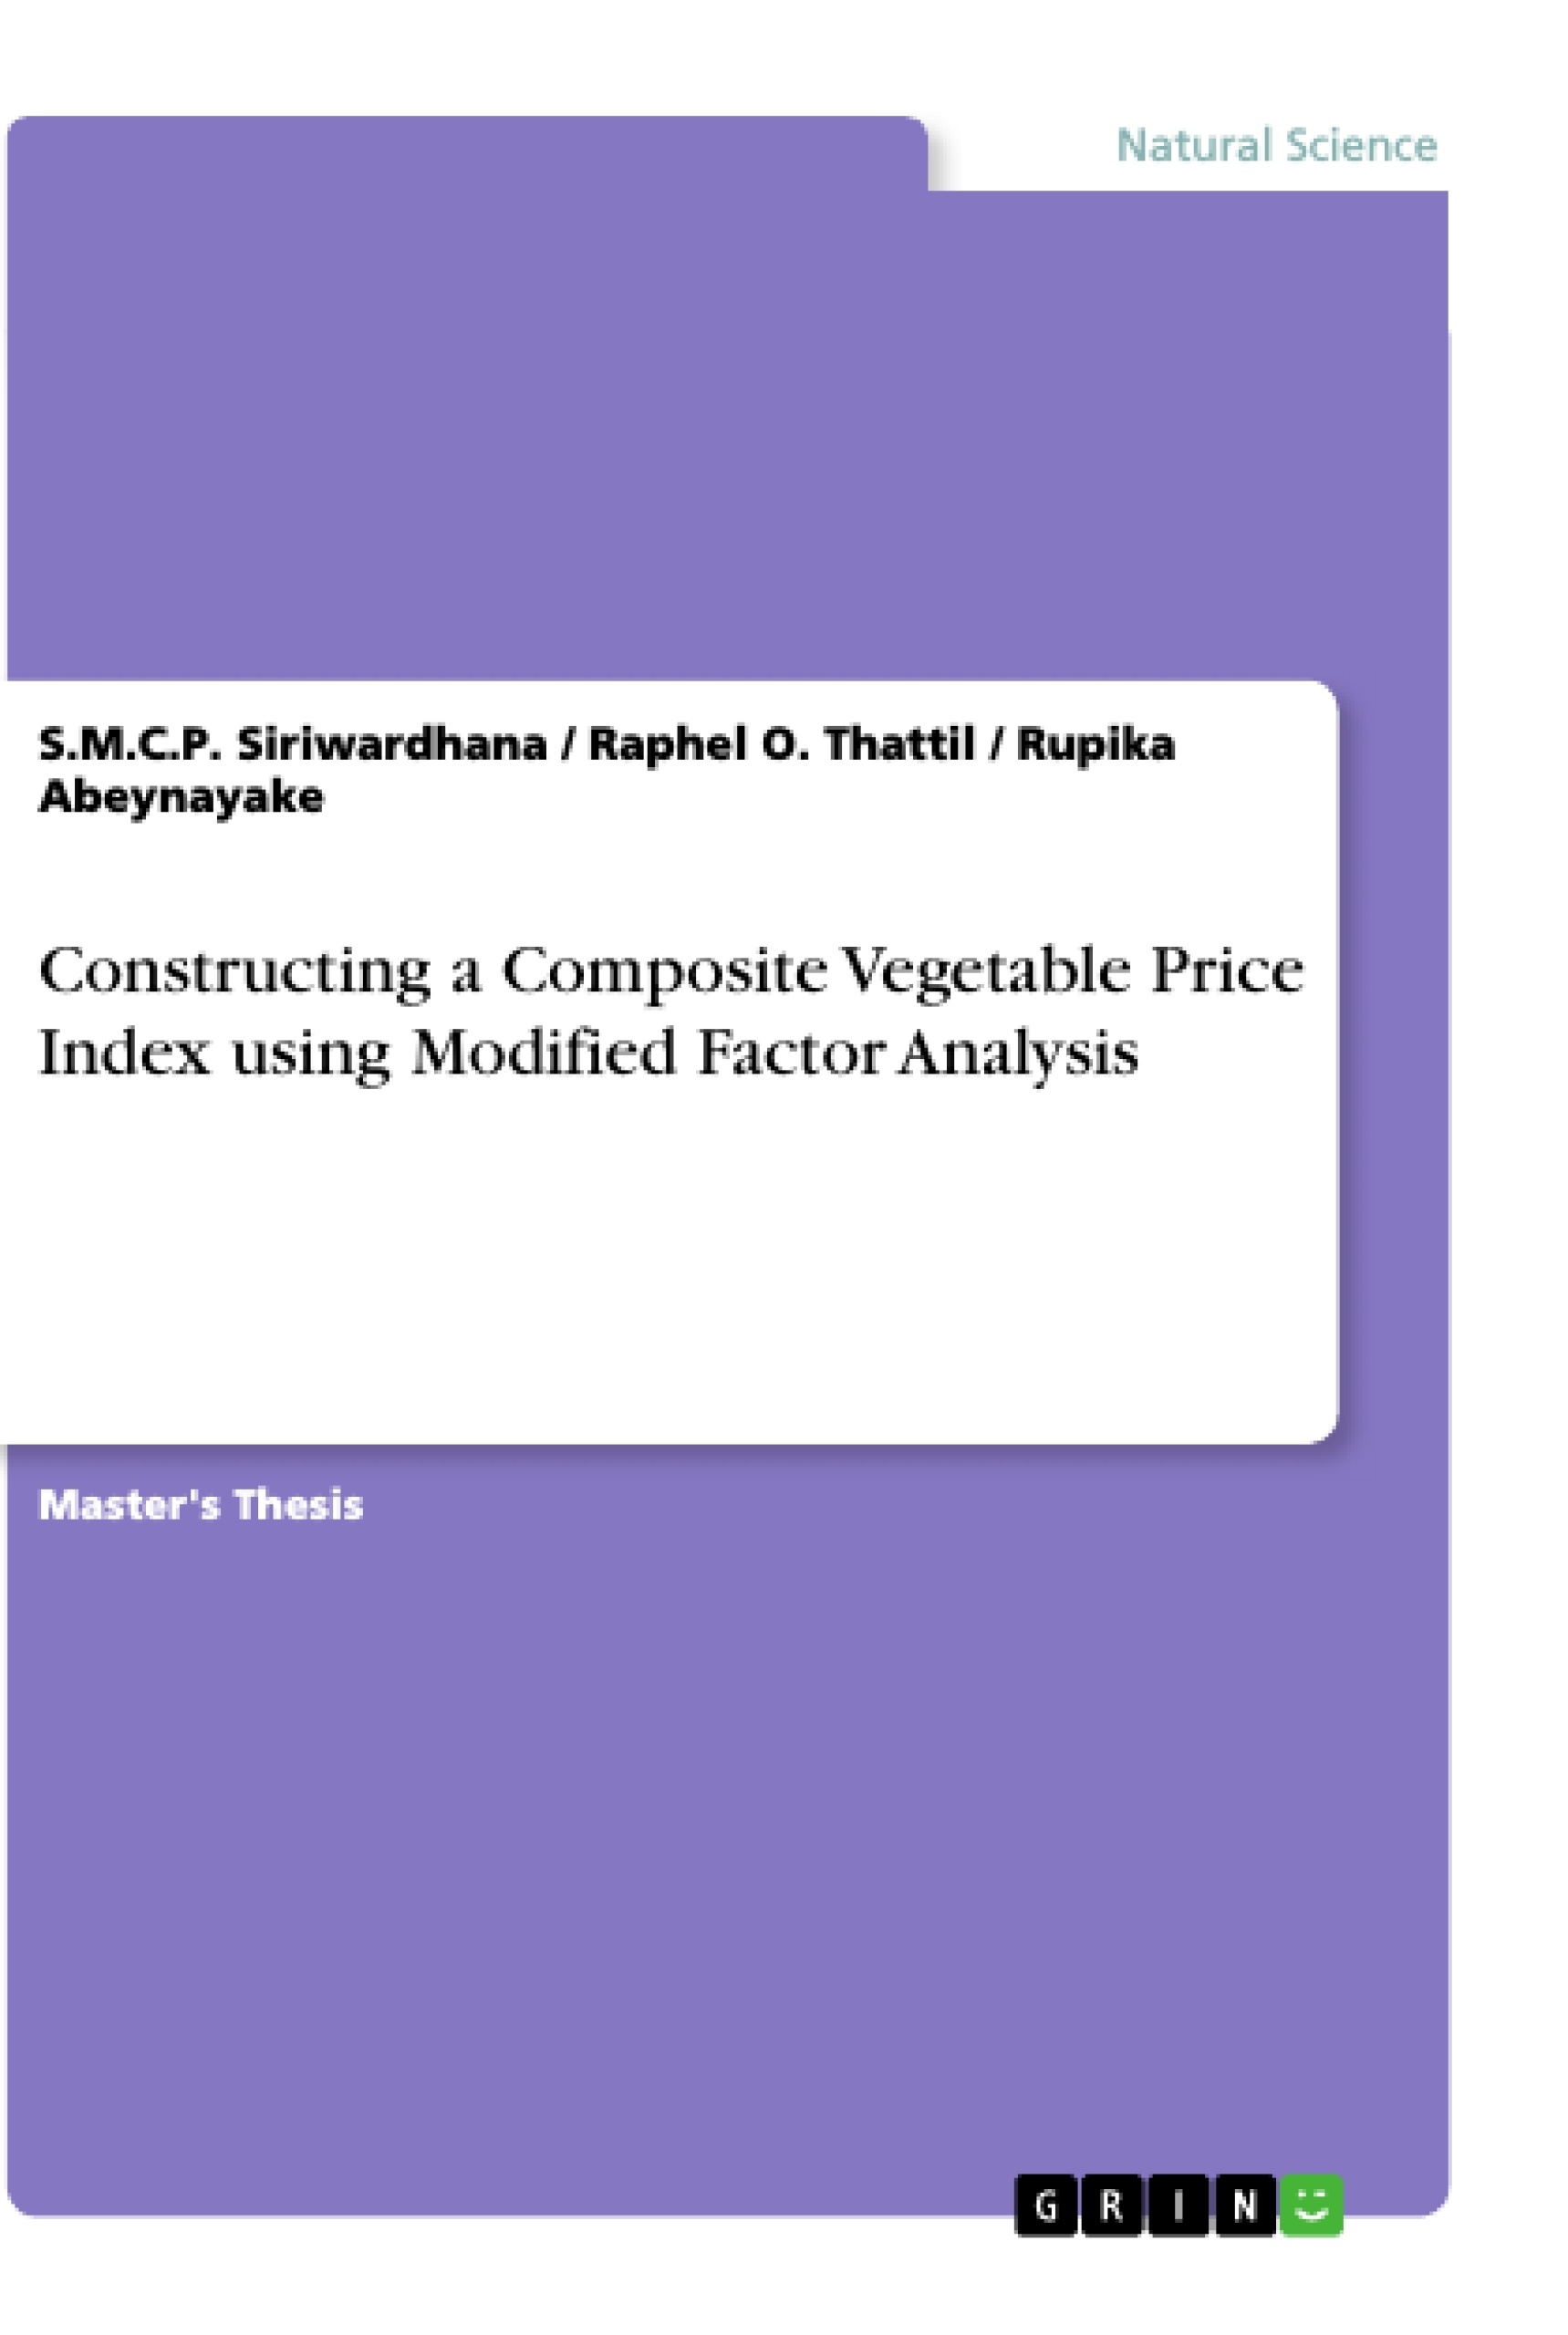 Titre: Constructing a Composite Vegetable Price Index using Modified Factor Analysis